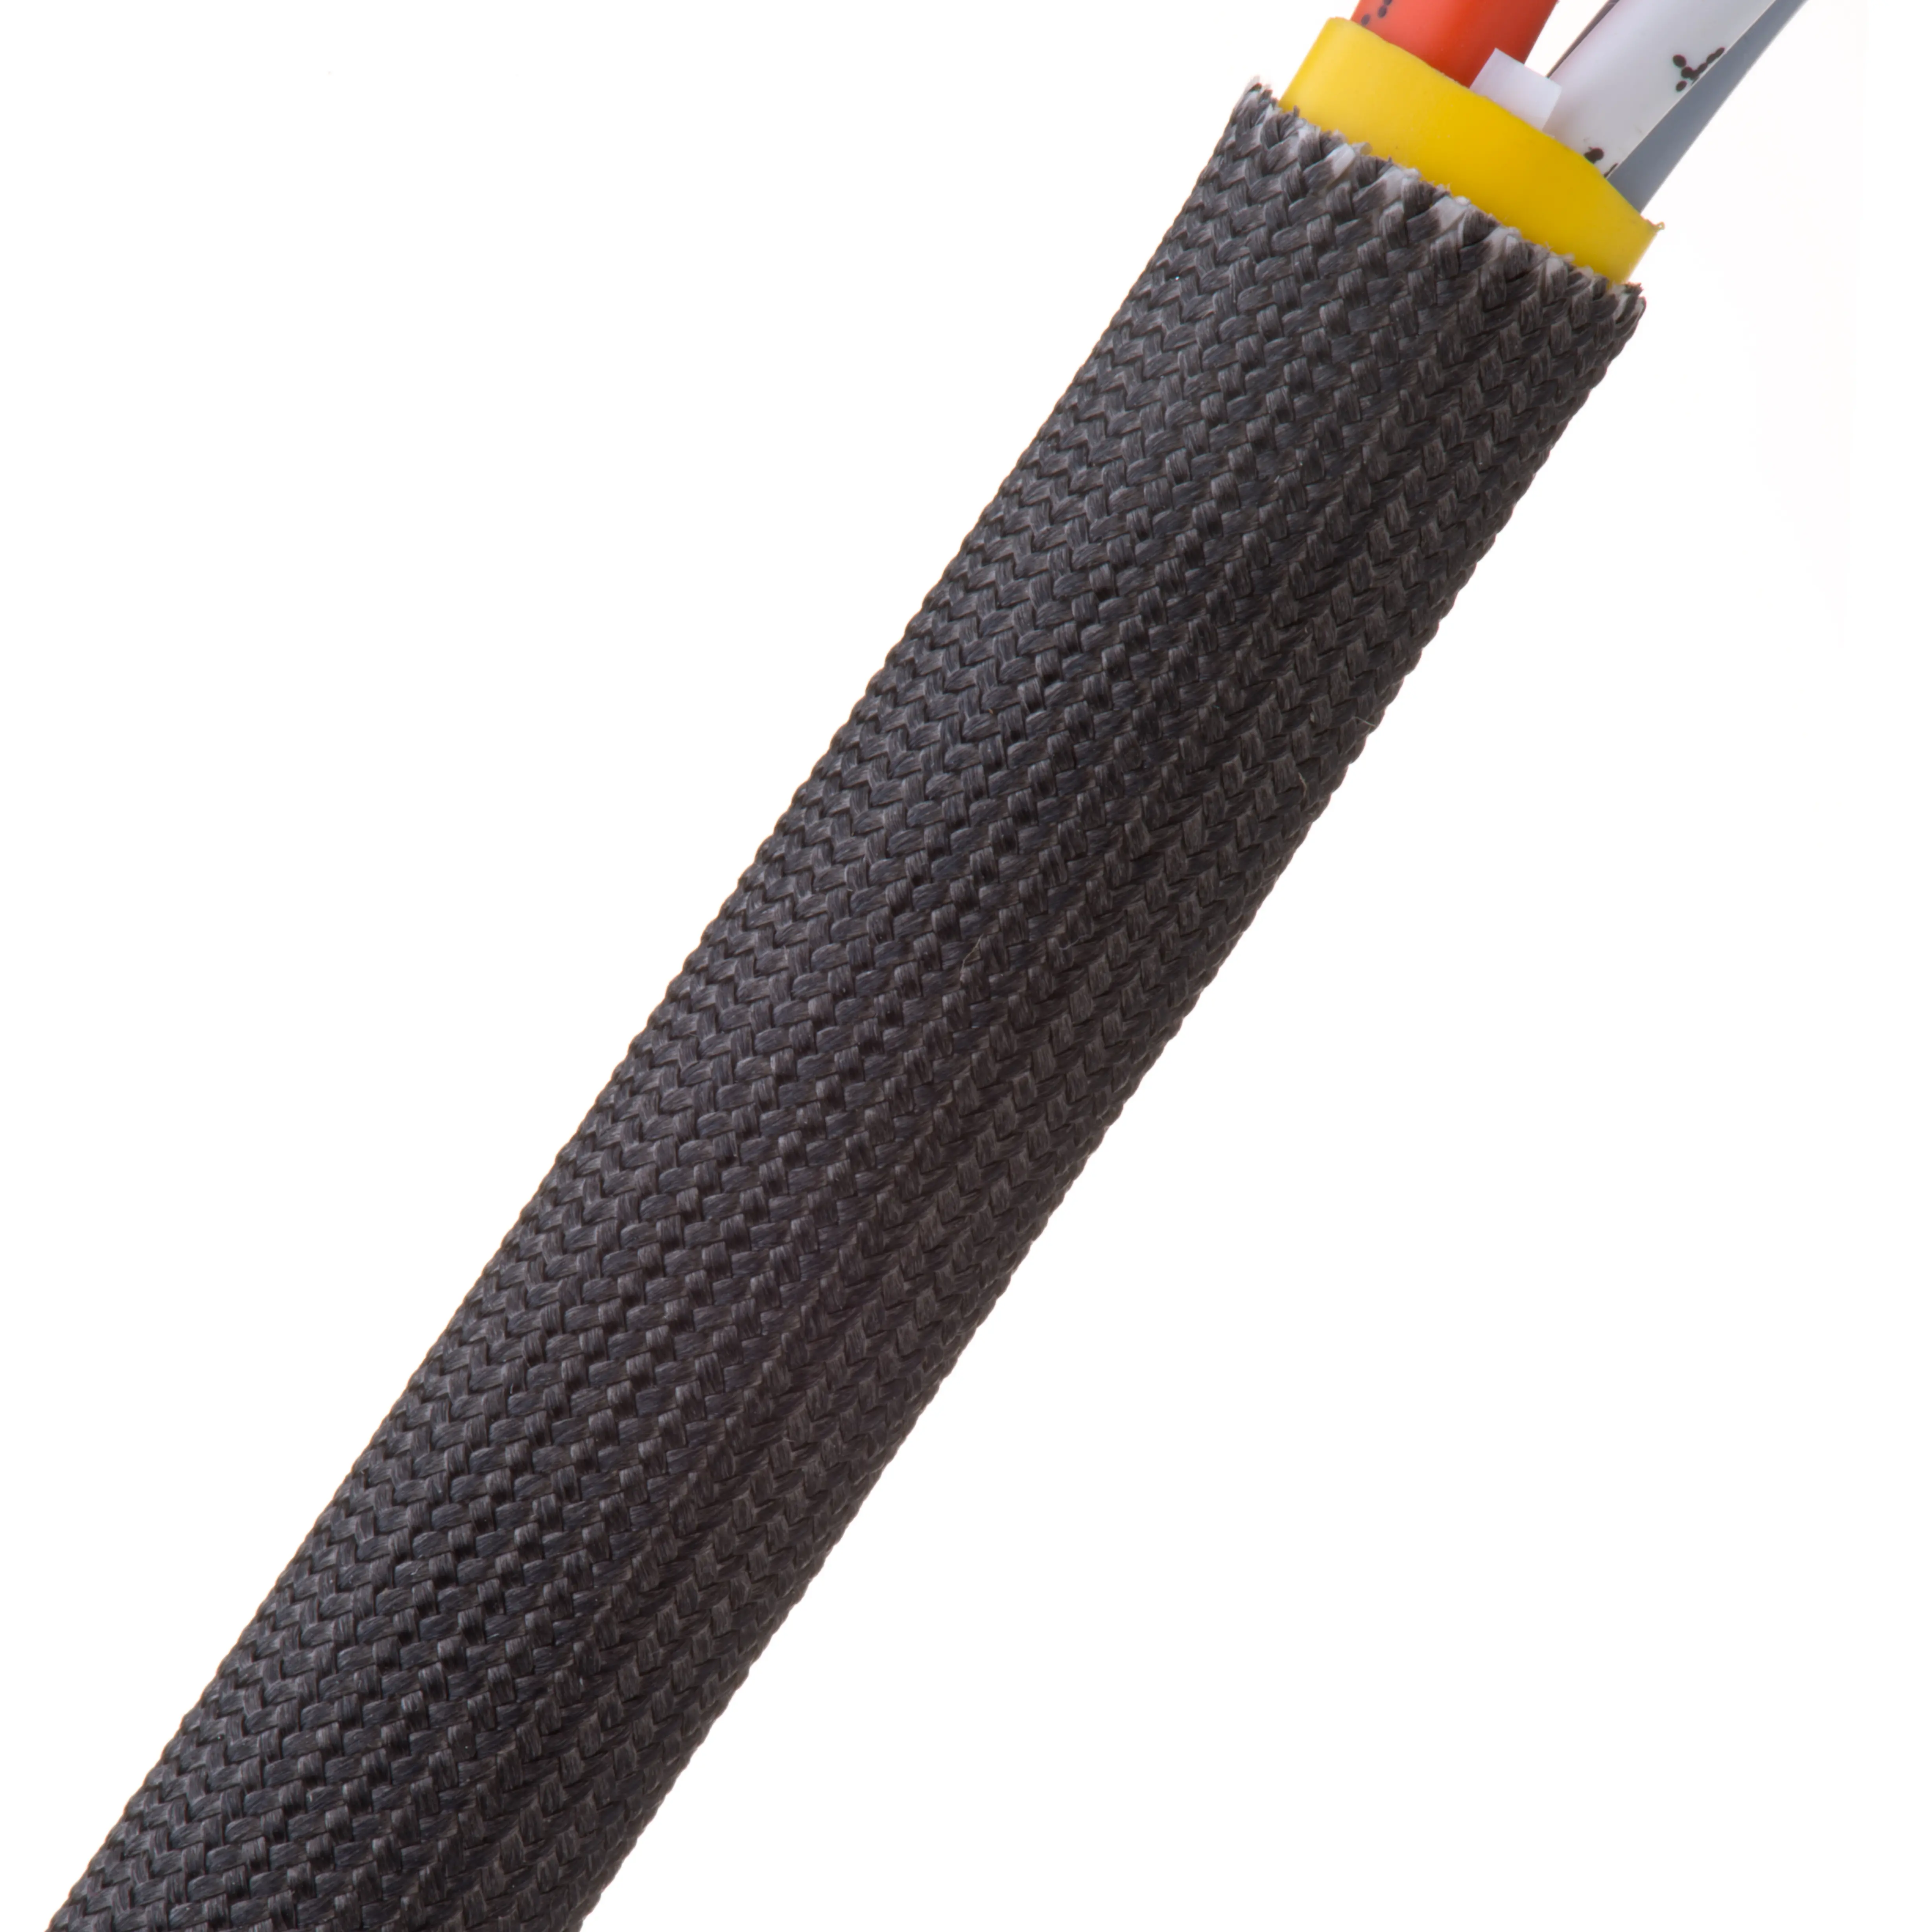 1/2" INSULTHERM SLEEVE BLACK